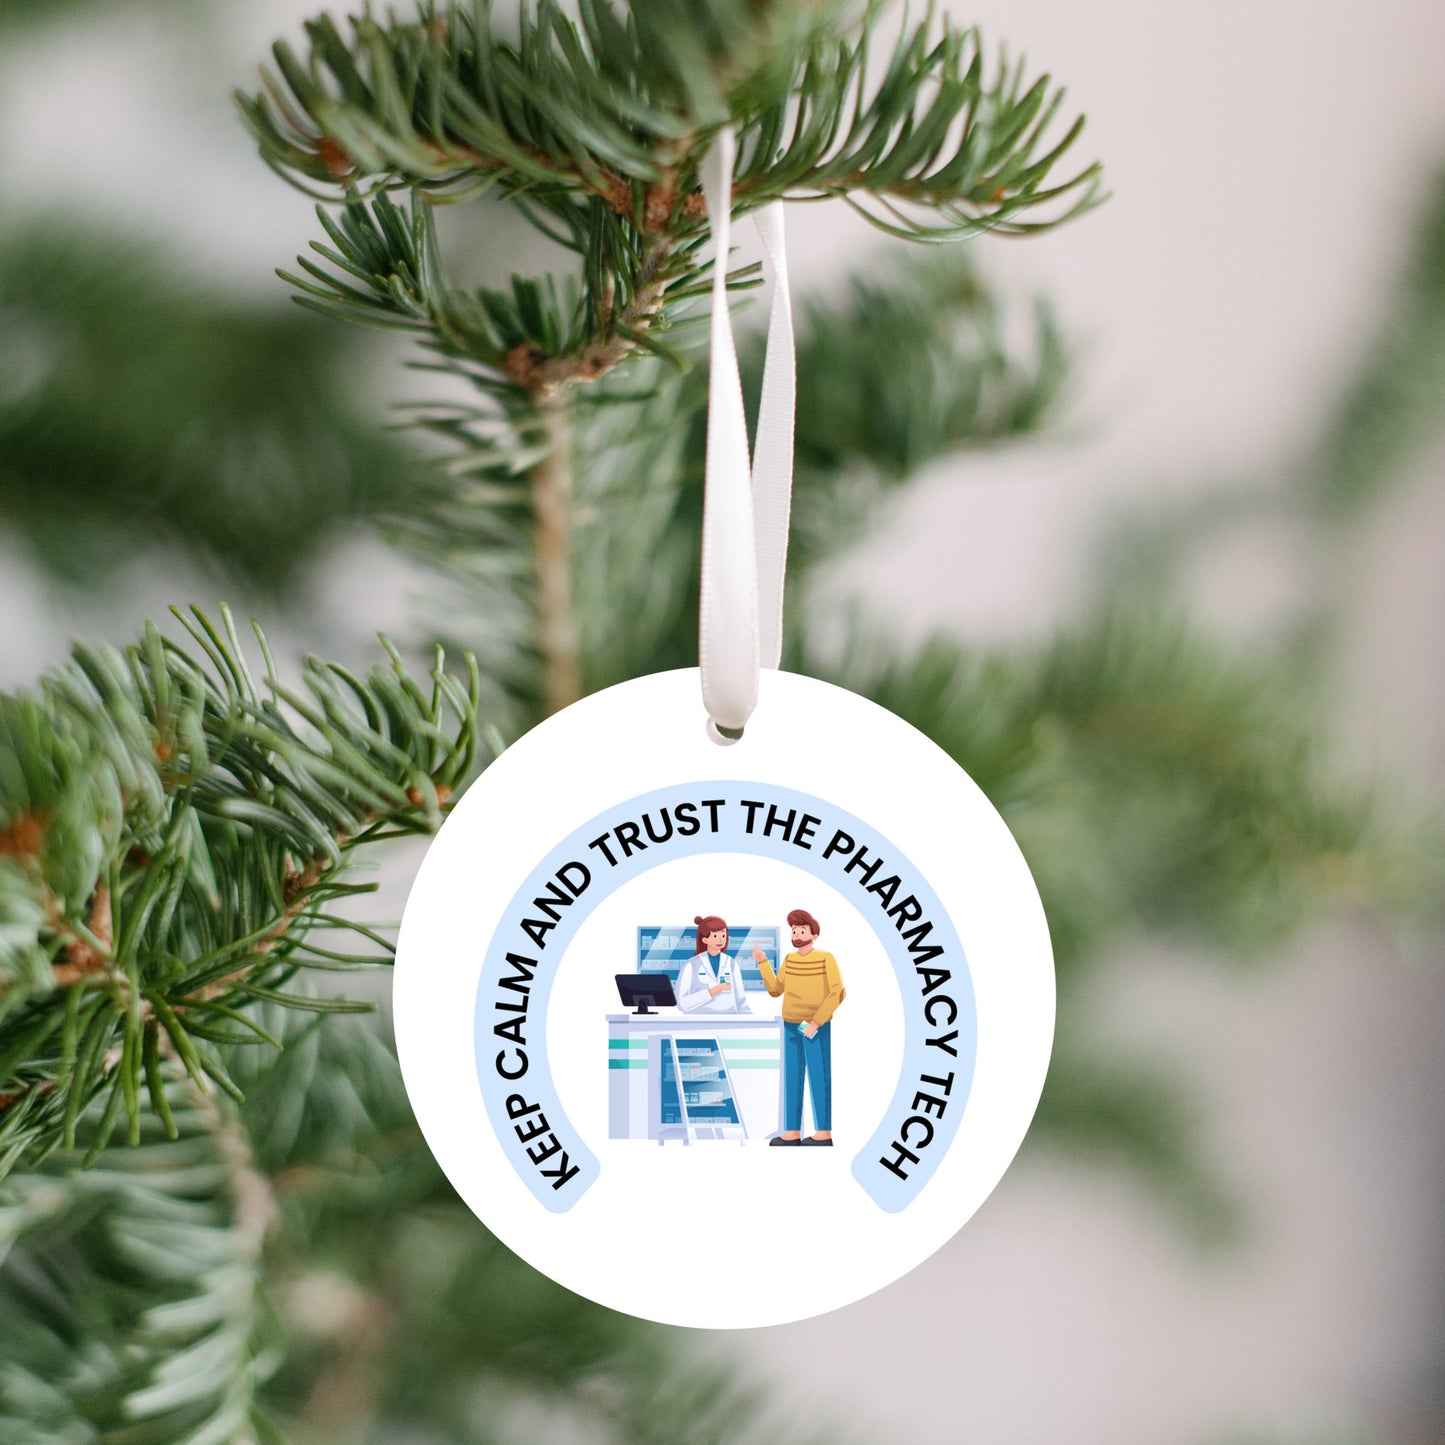 Pharmacy Tech Ornament - 1/8" Ornament - FREE SHIPPING! Buy 3 Ornaments Get 10% Off, Buy 5 Ornaments Get 20% Off, Buy 10 Ornaments Get 30% Off! Discounts Applied Automatically At Checkout